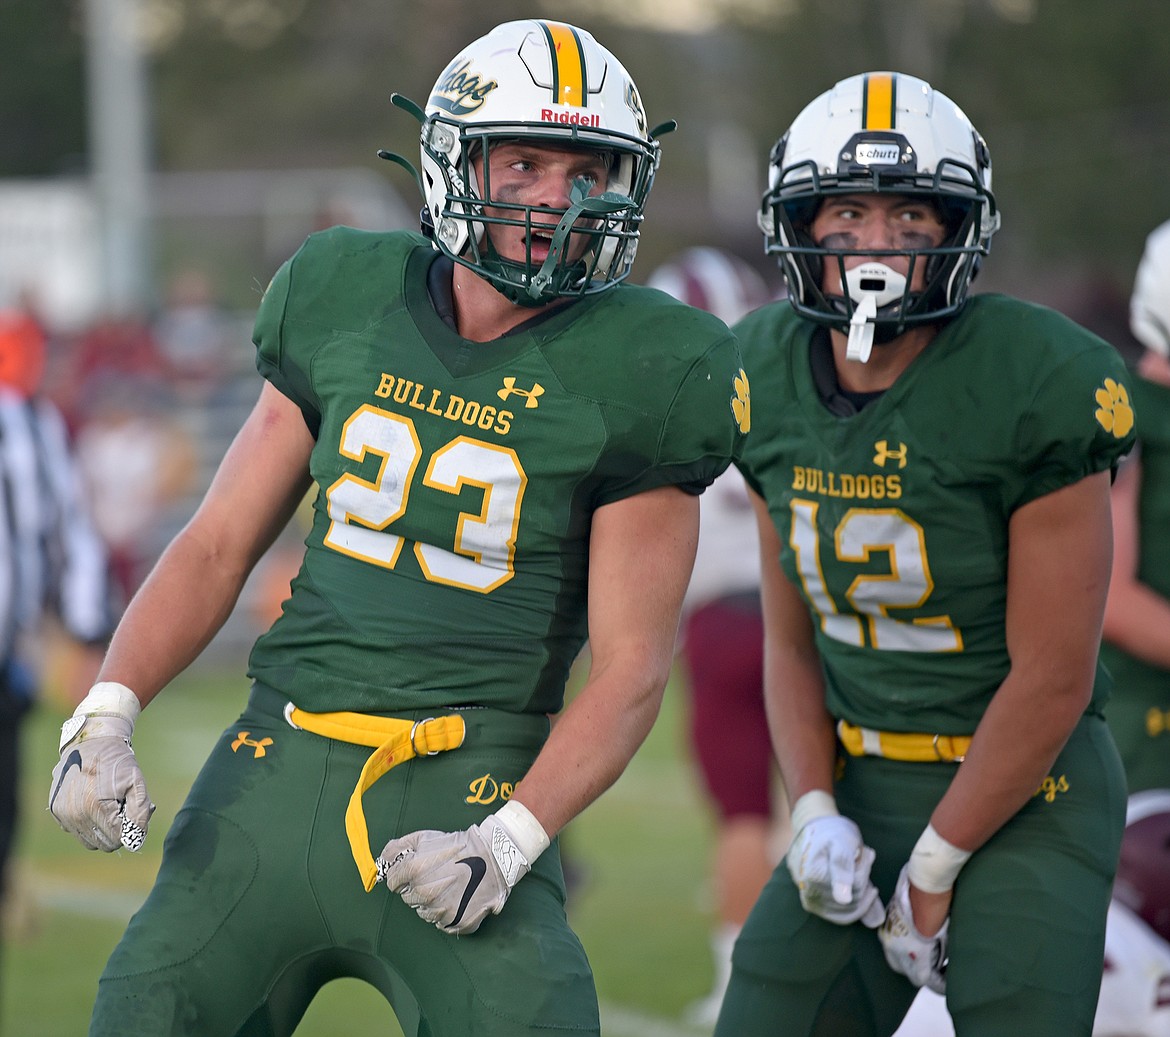 Whitefish players Ty Schwaiger and Luke Moses celebrate a big defensive play in a game against Butte Central on Friday in Whitefish. (Whitney England/Whitefish Pilot)